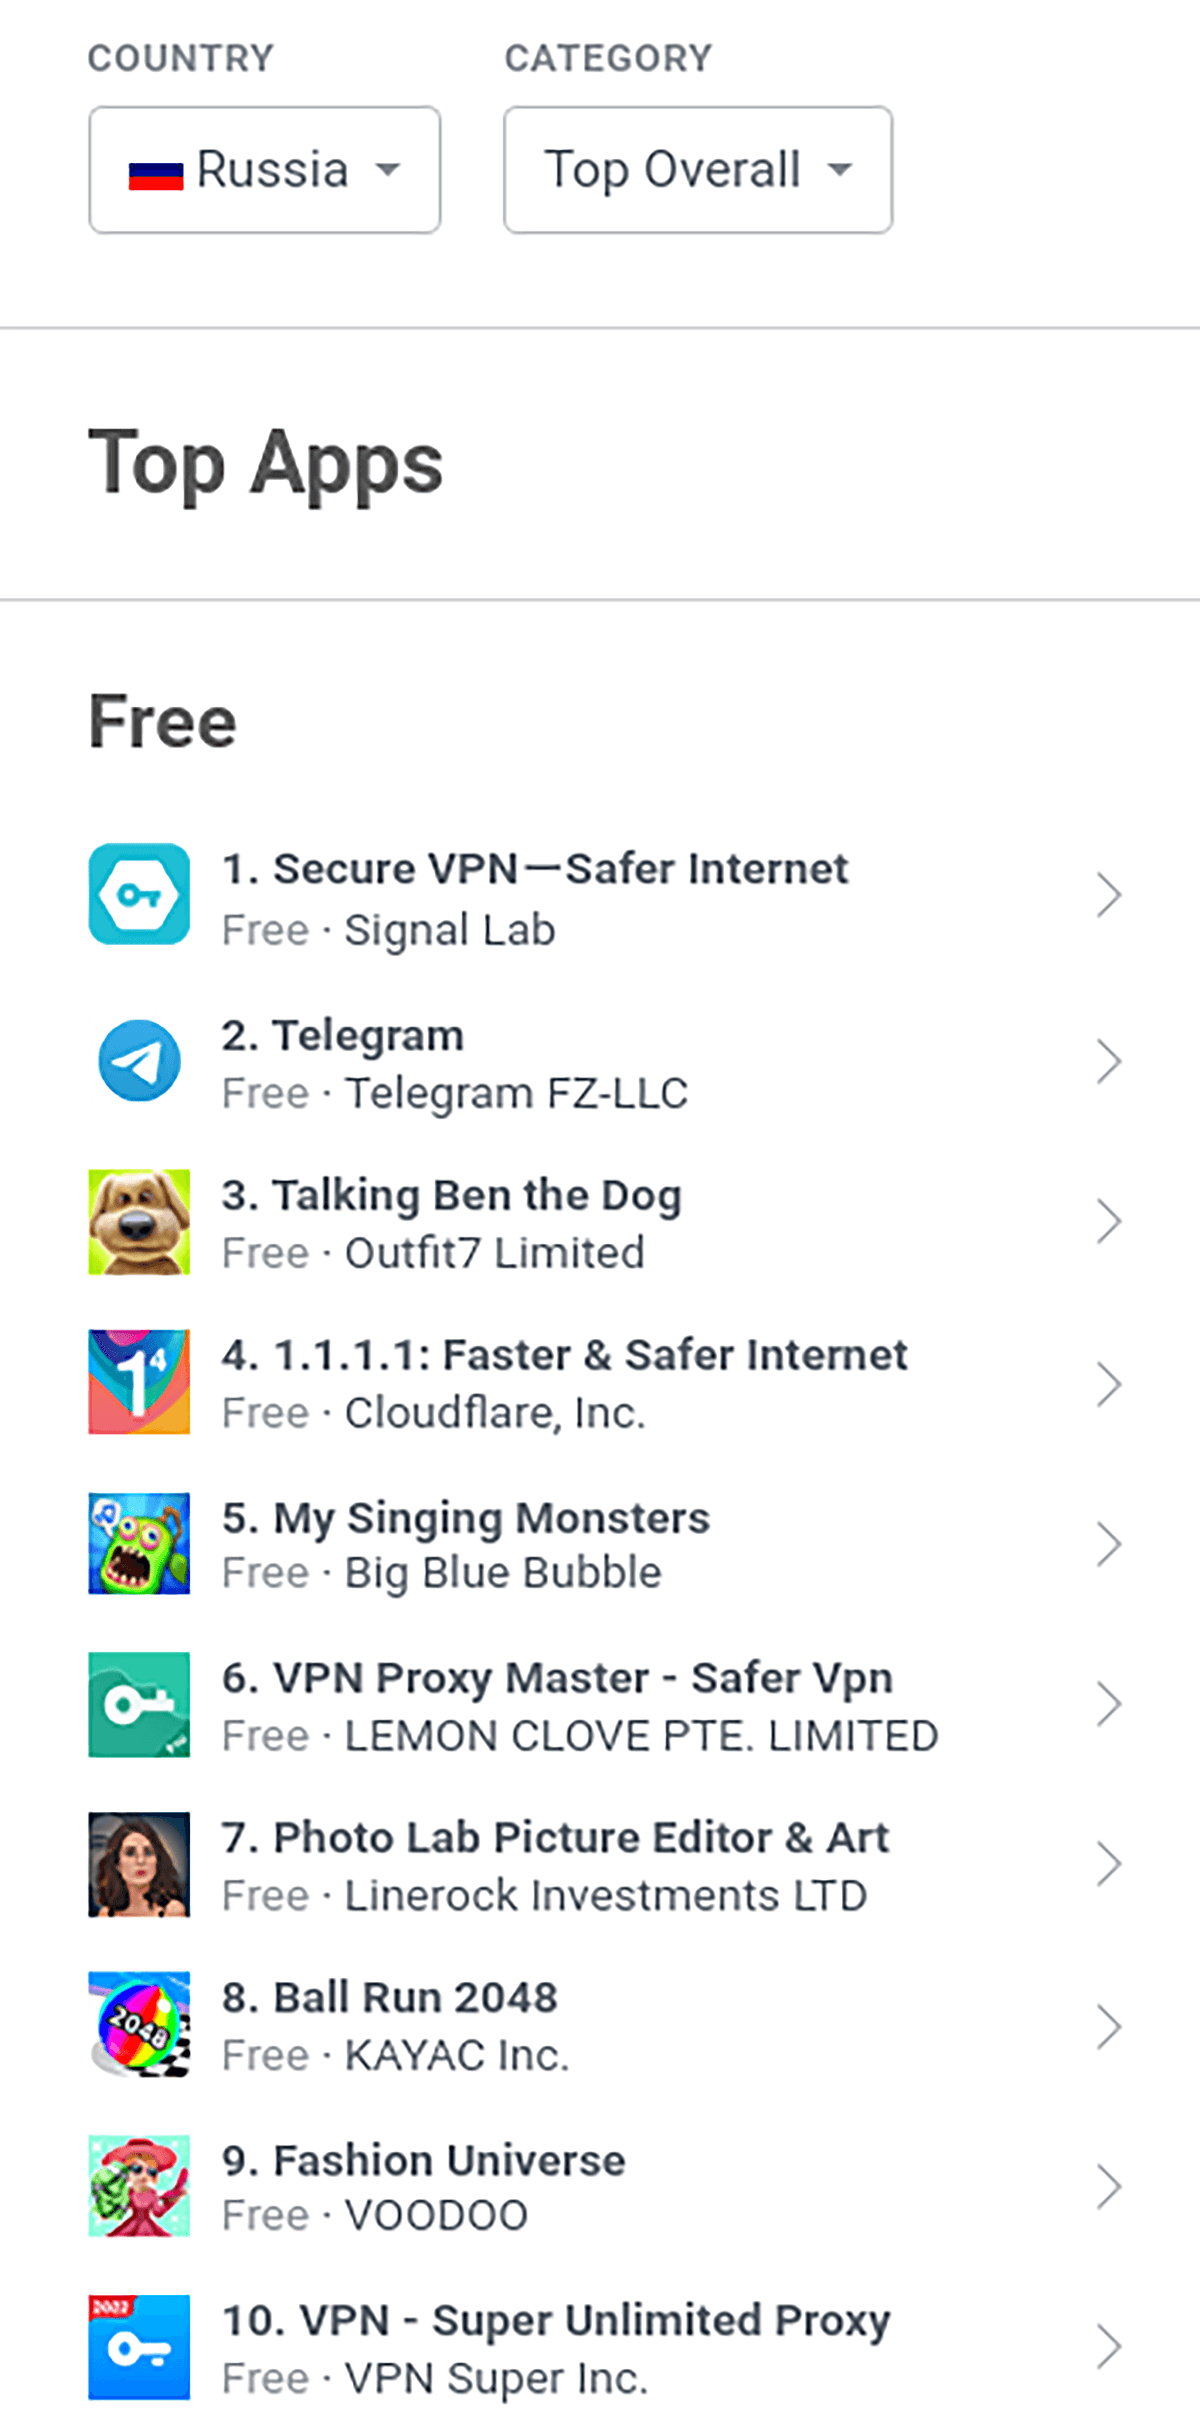 Top Ranked Google Play Apps